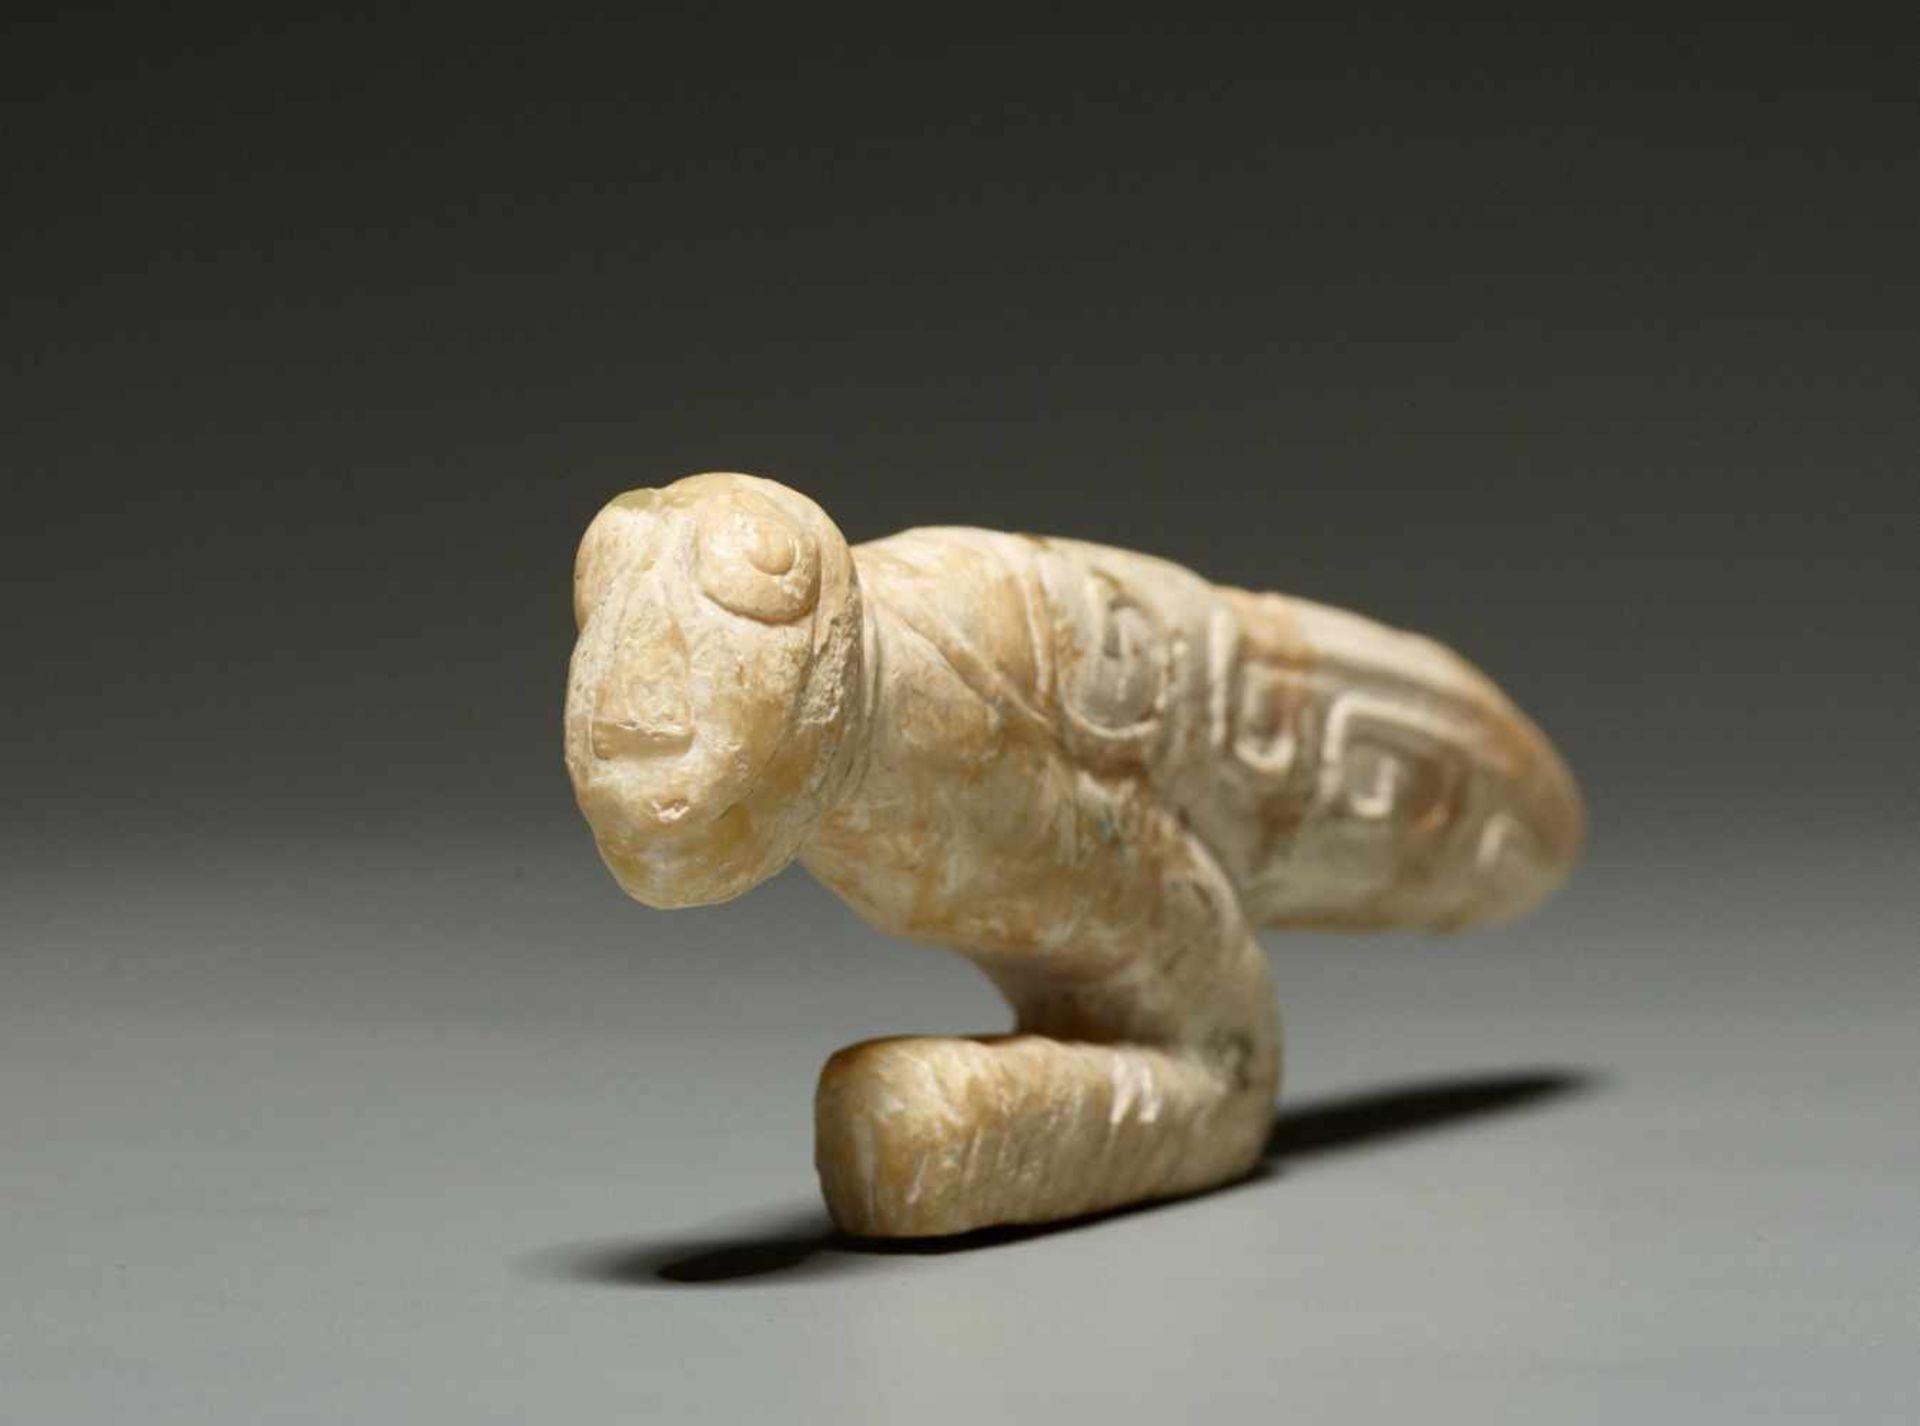 A LATE SHANG SCULPTURAL PRAYING MANTIS IN ALTERED JADE WITH AN IVORY QUALITY Jade. China, Late Shang - Image 5 of 11